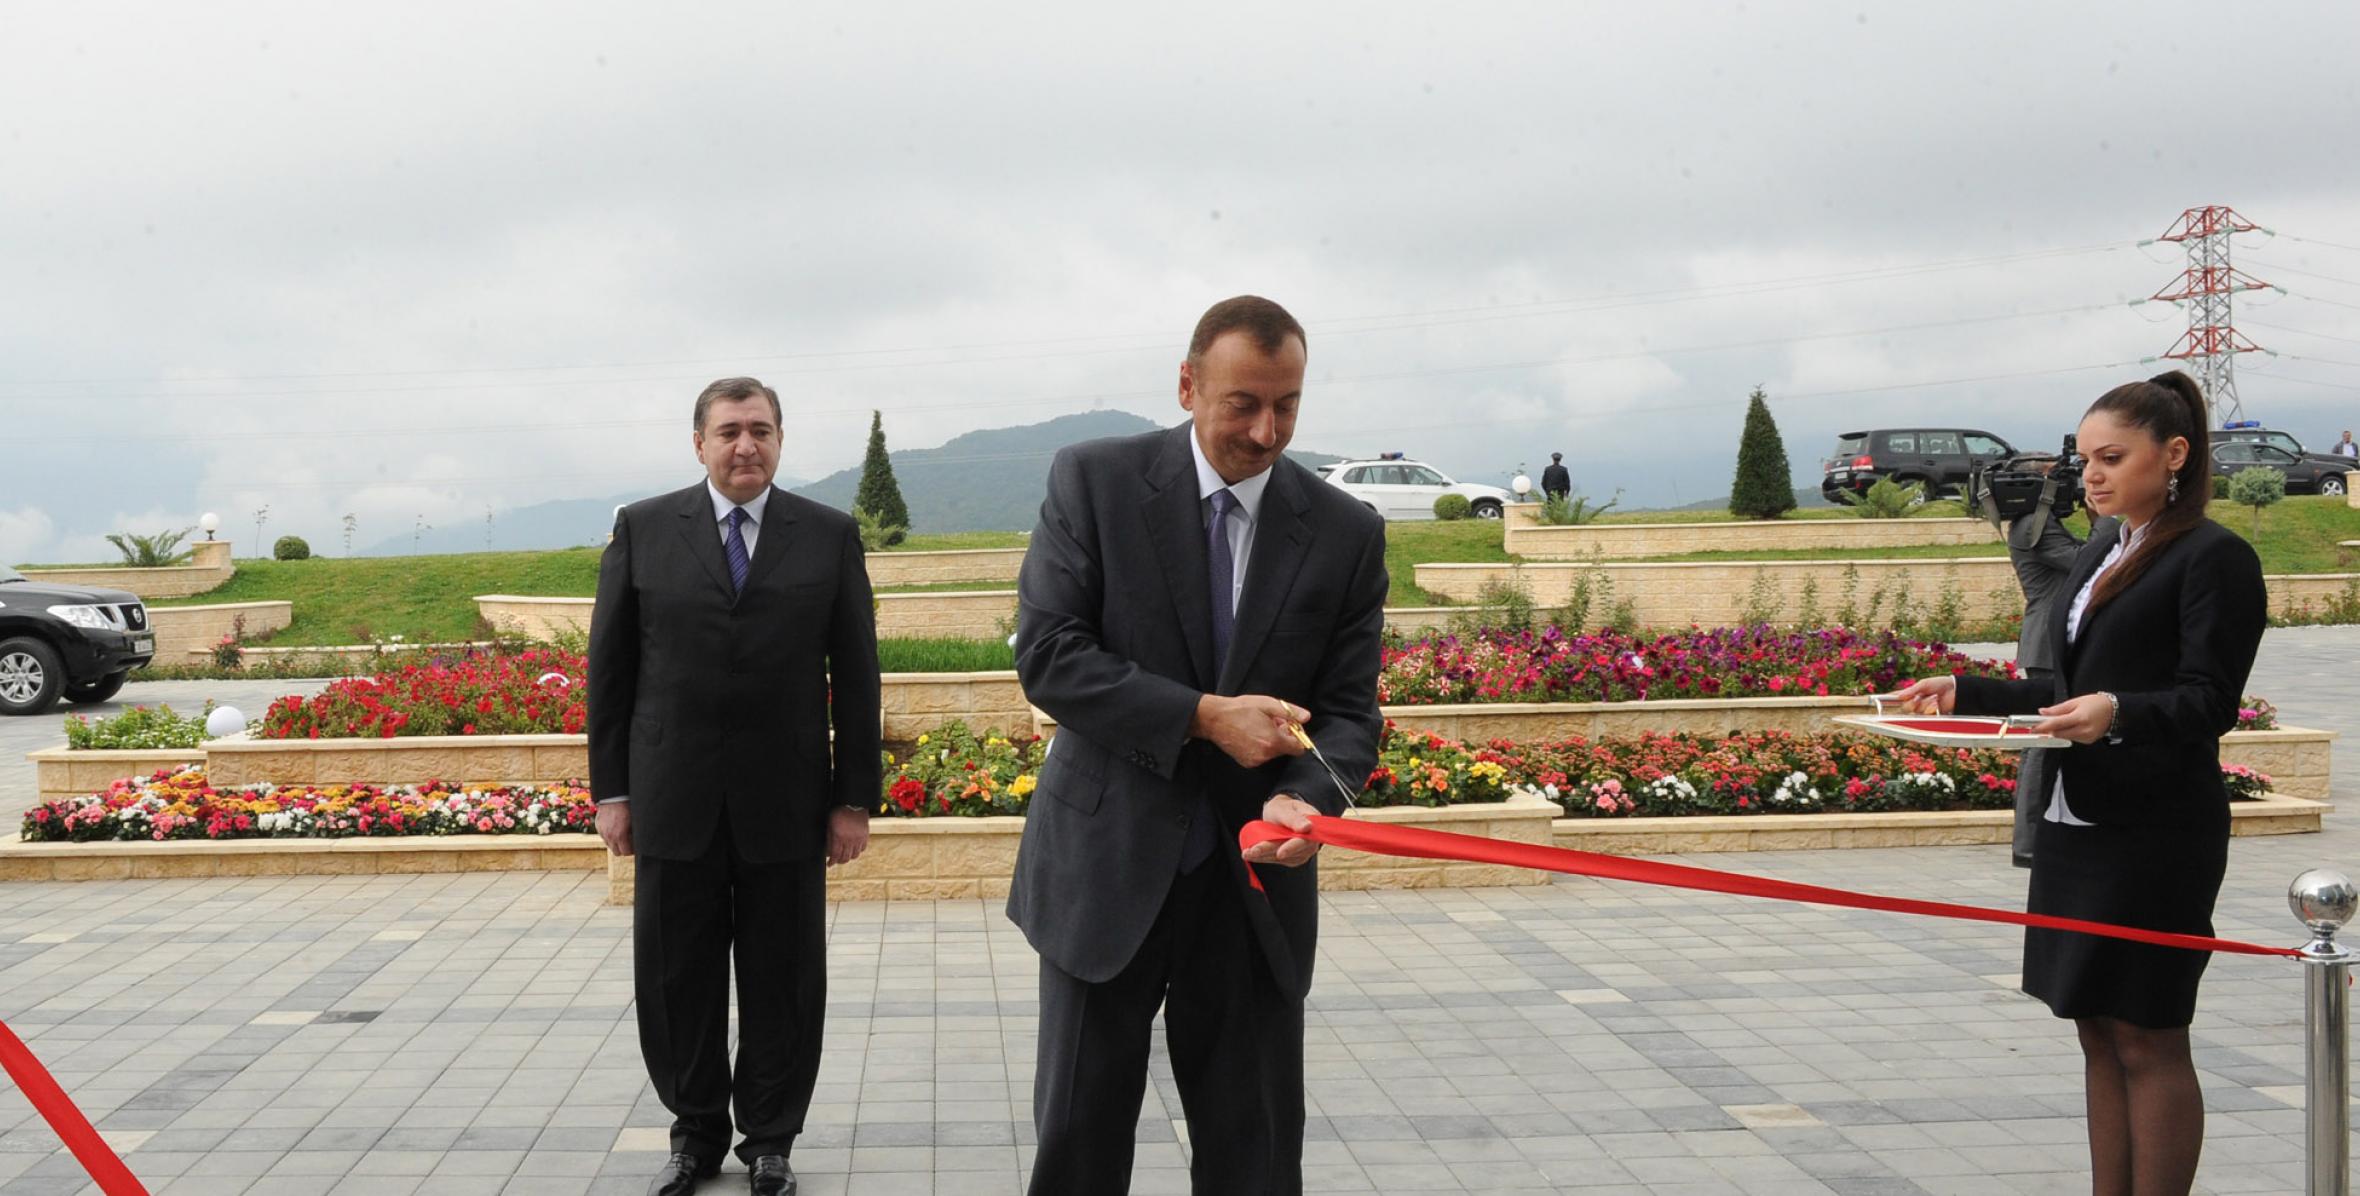 Ilham Aliyev attended the opening of the Training Center of the Ministry of Taxes in Shamakhi